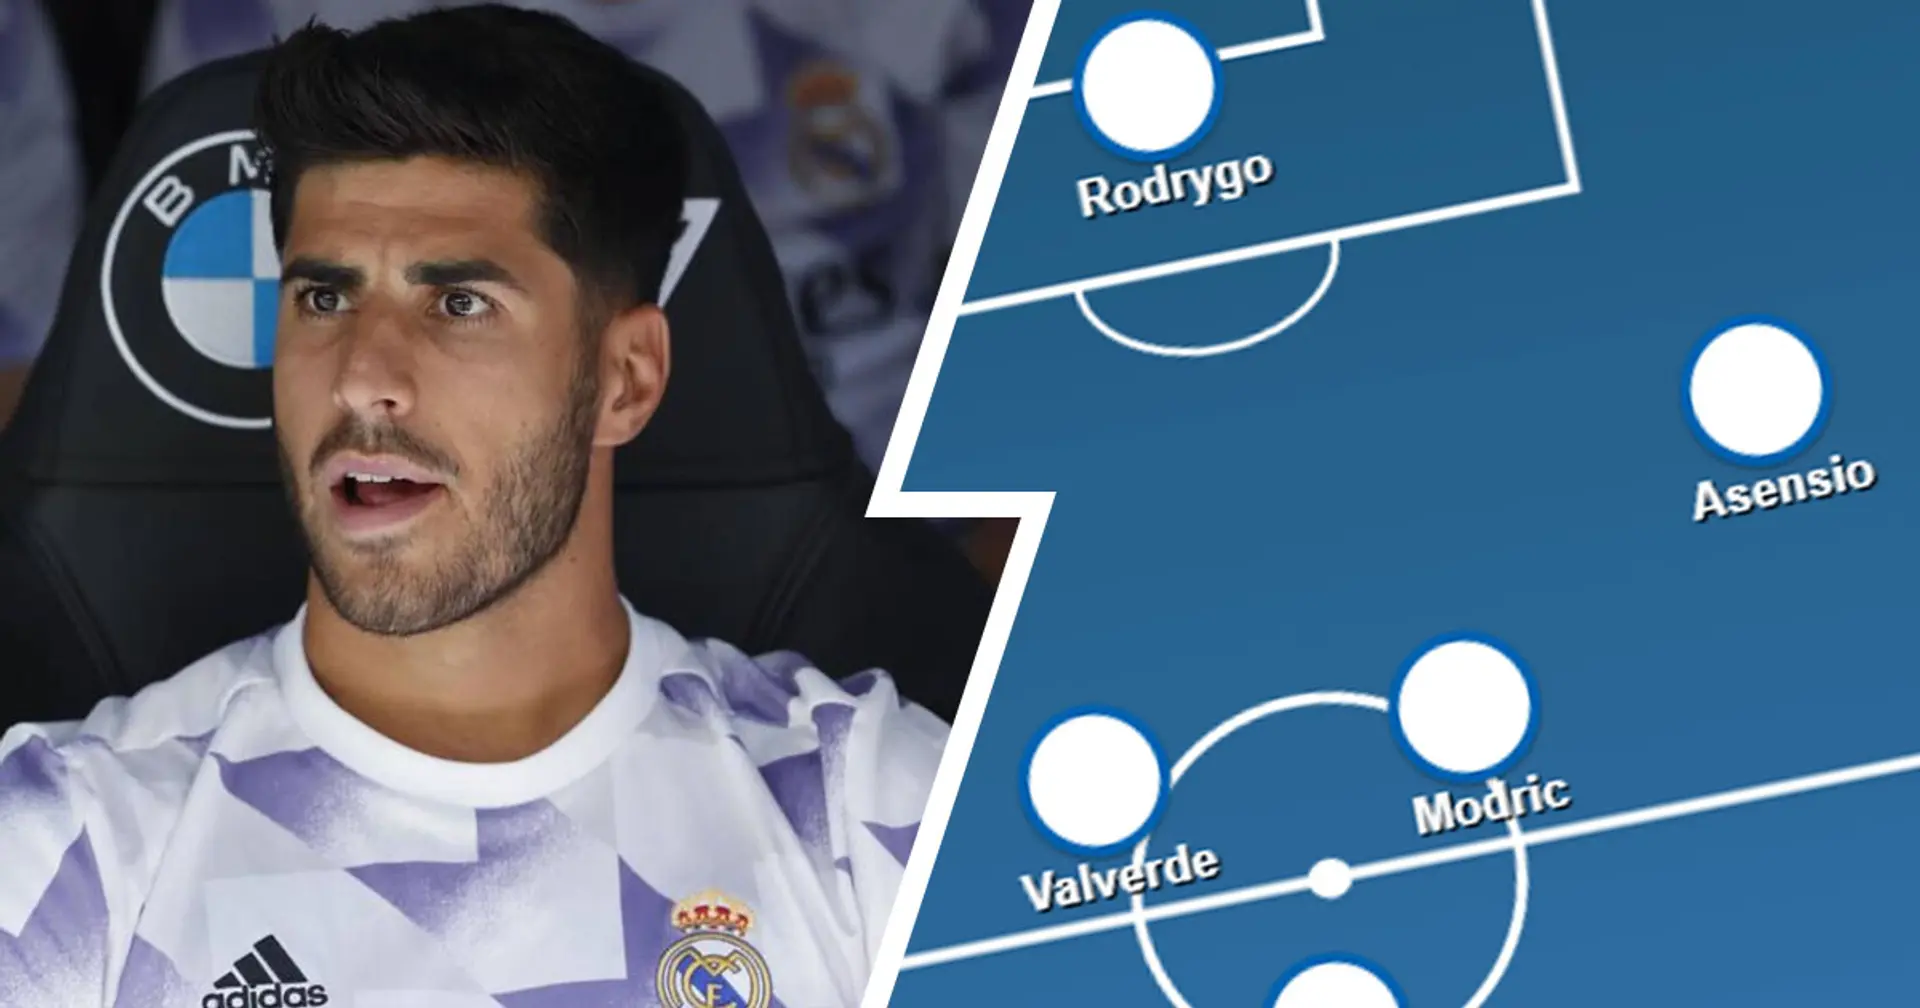 Asensio to get first league start: Team news and predicted lineups for Real Madrid v Rayo